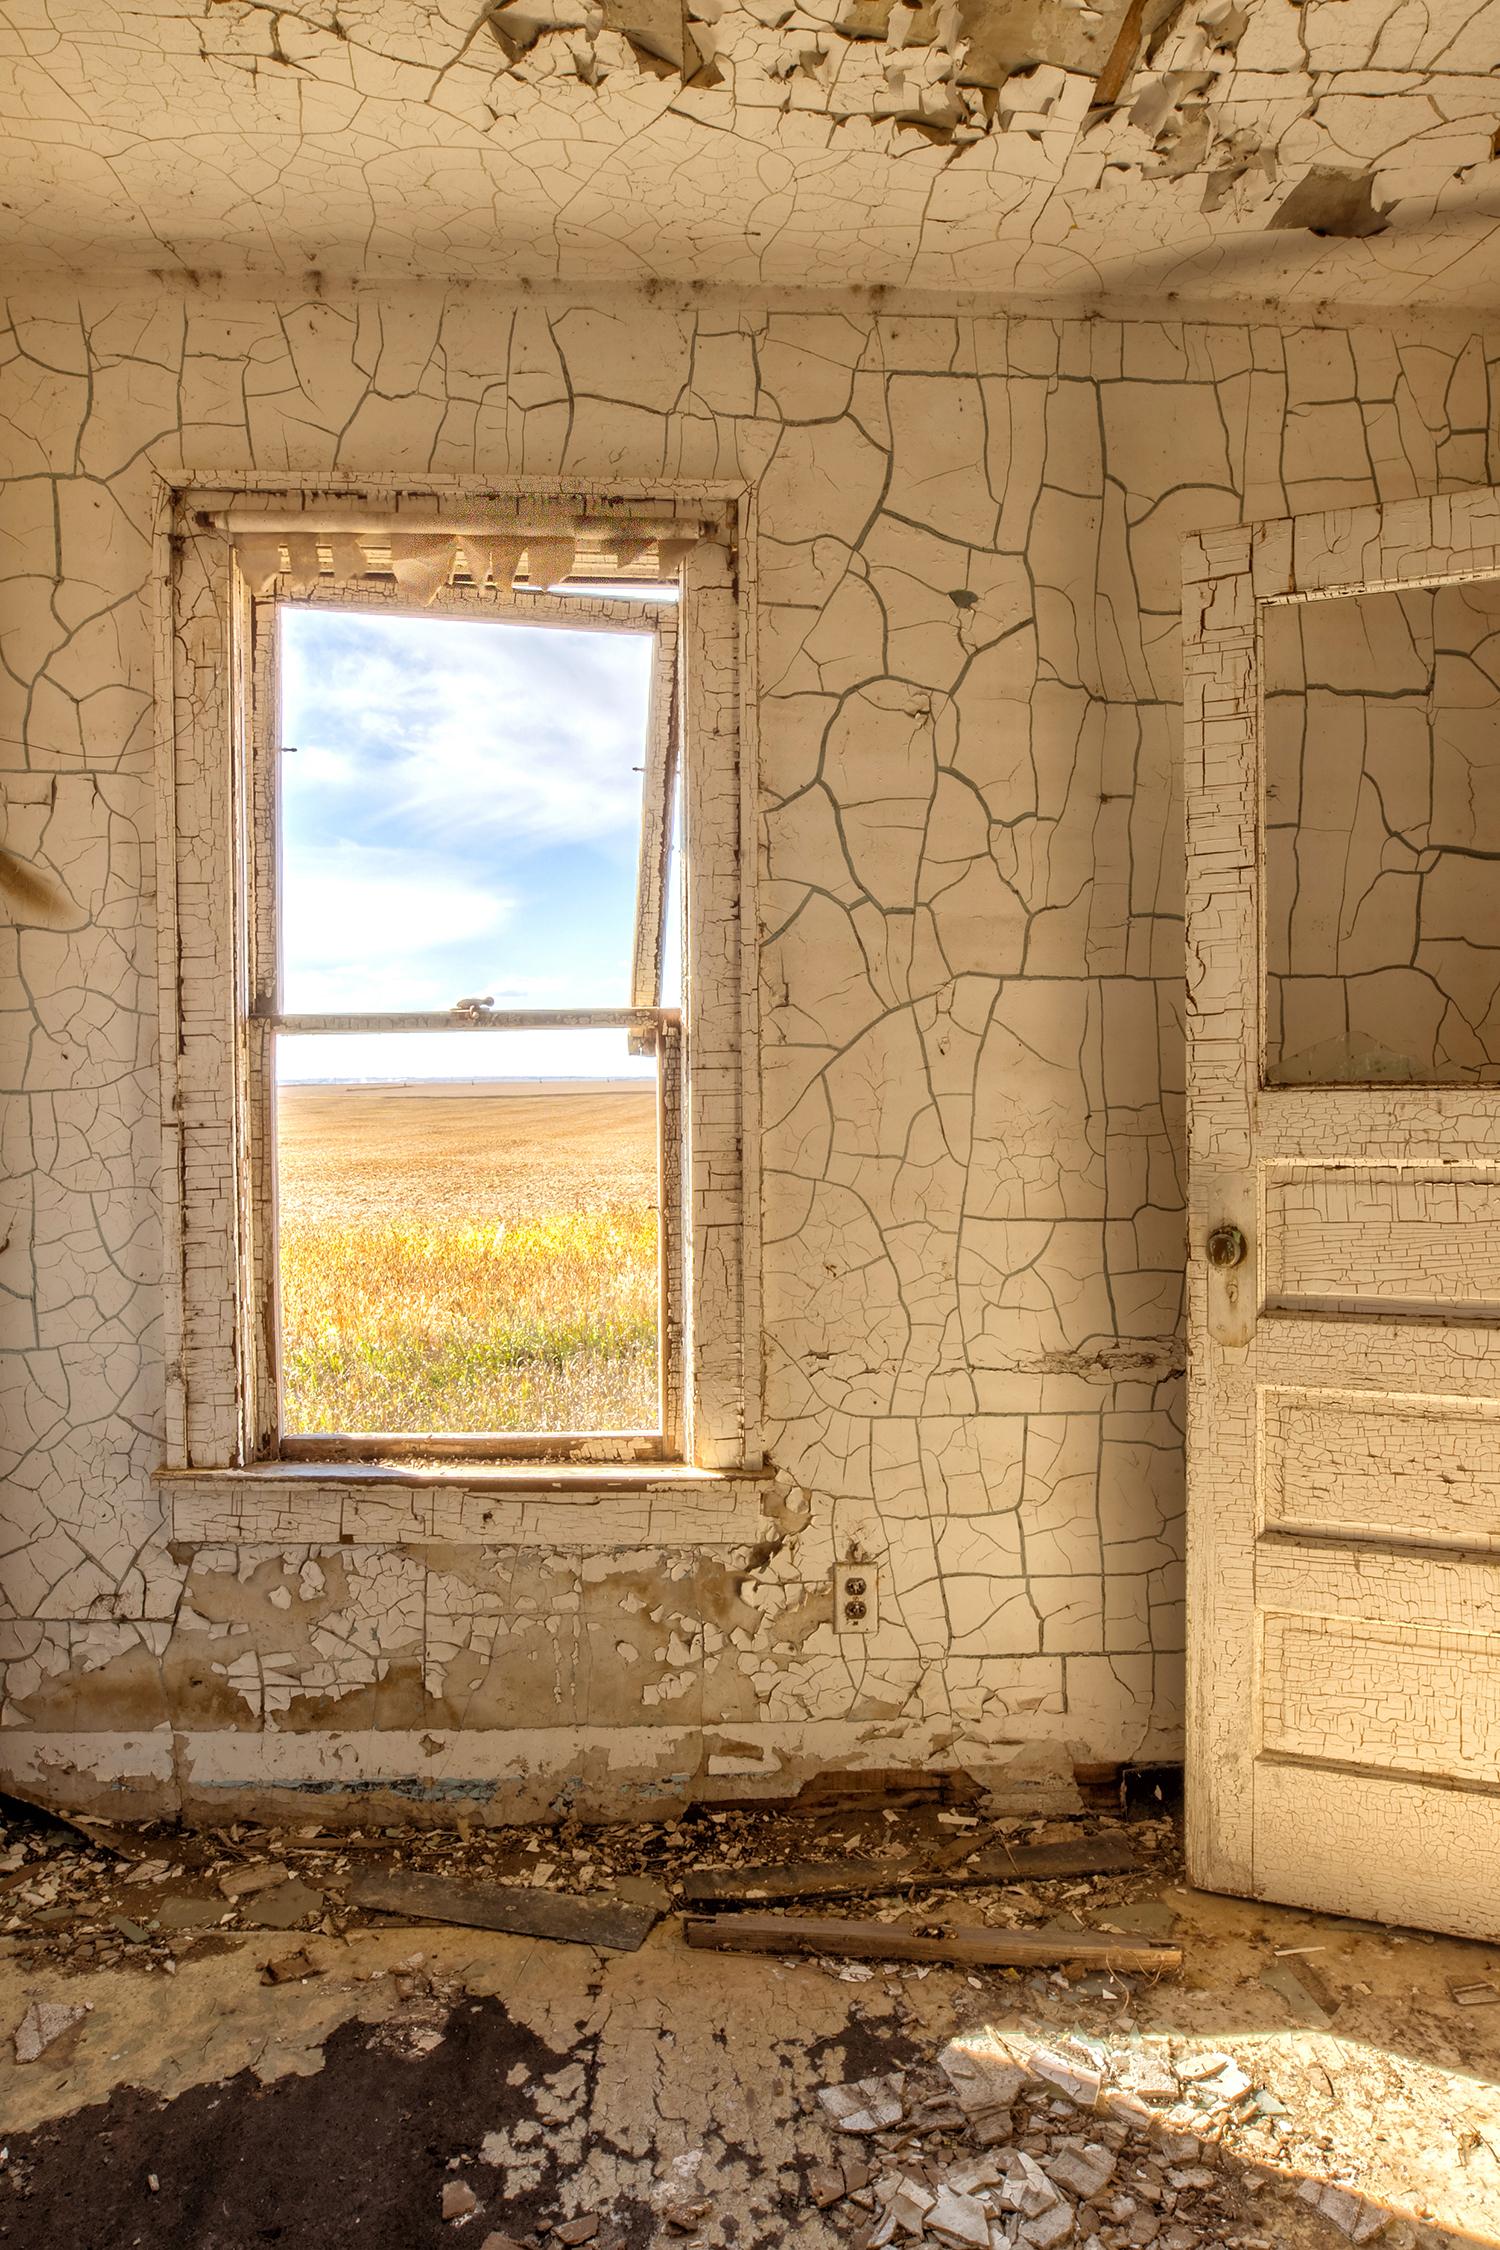 Rebecca Skinner’s “Interior III” is a 12 x 18 inch color photograph taken from inside an abandoned farmhouse in North Dakota. The viewer gets a glimpse of the beautiful landscape thru a dilapidated kitchen window surrounded with walls of white